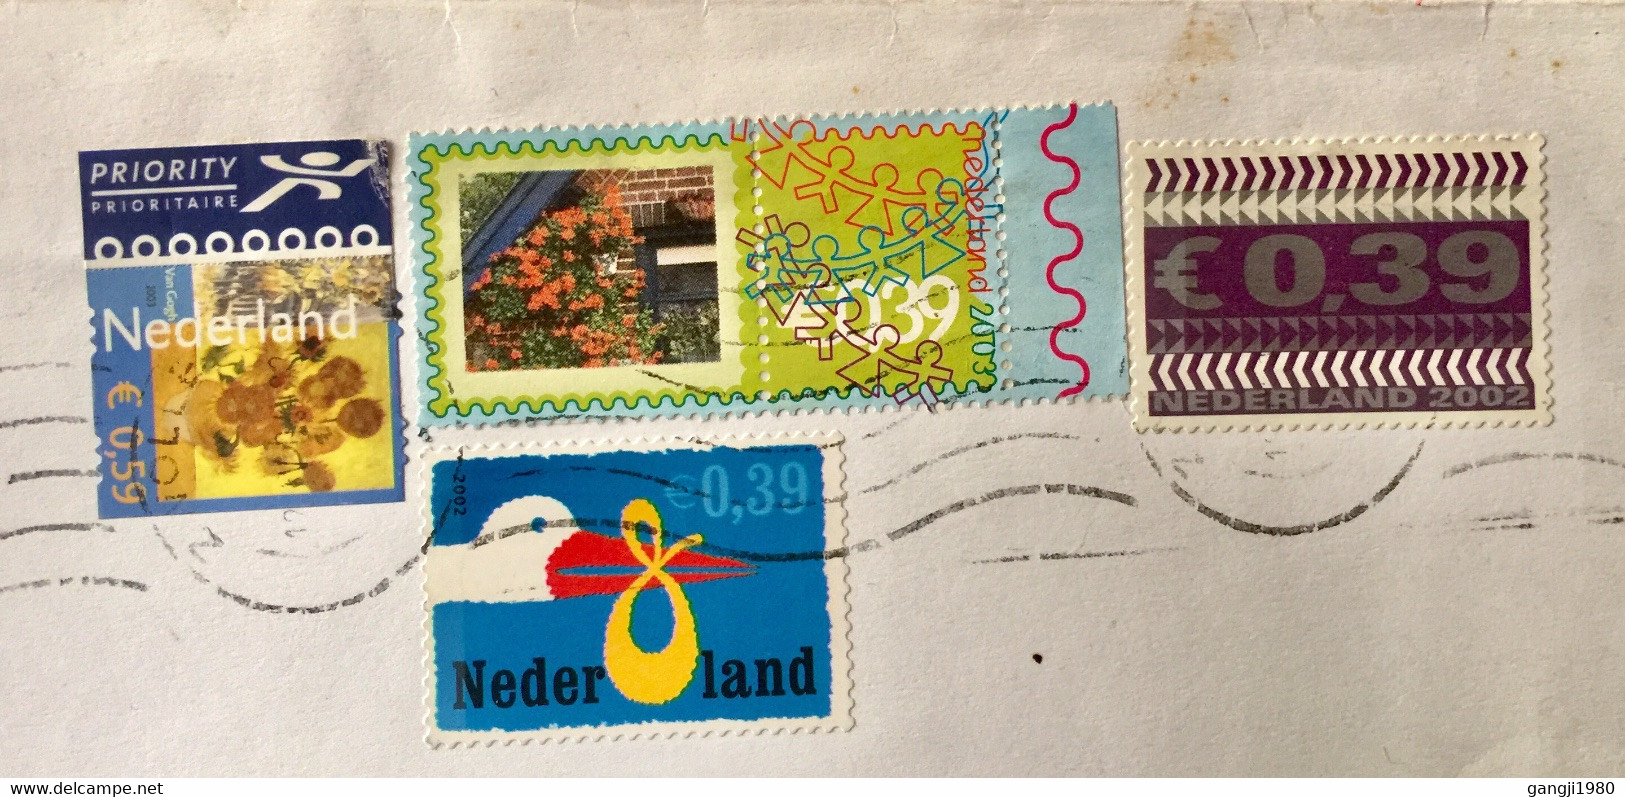 NEDERLAND 2004, USED AIRMAIL COVER ZOWLLE TO MARIJAMPOLE ,LITHUANIA 4 STAMPS SE-TENENT,BIRD,ART ,FLOWER,POT ,ART ,PAINTI - Briefe U. Dokumente